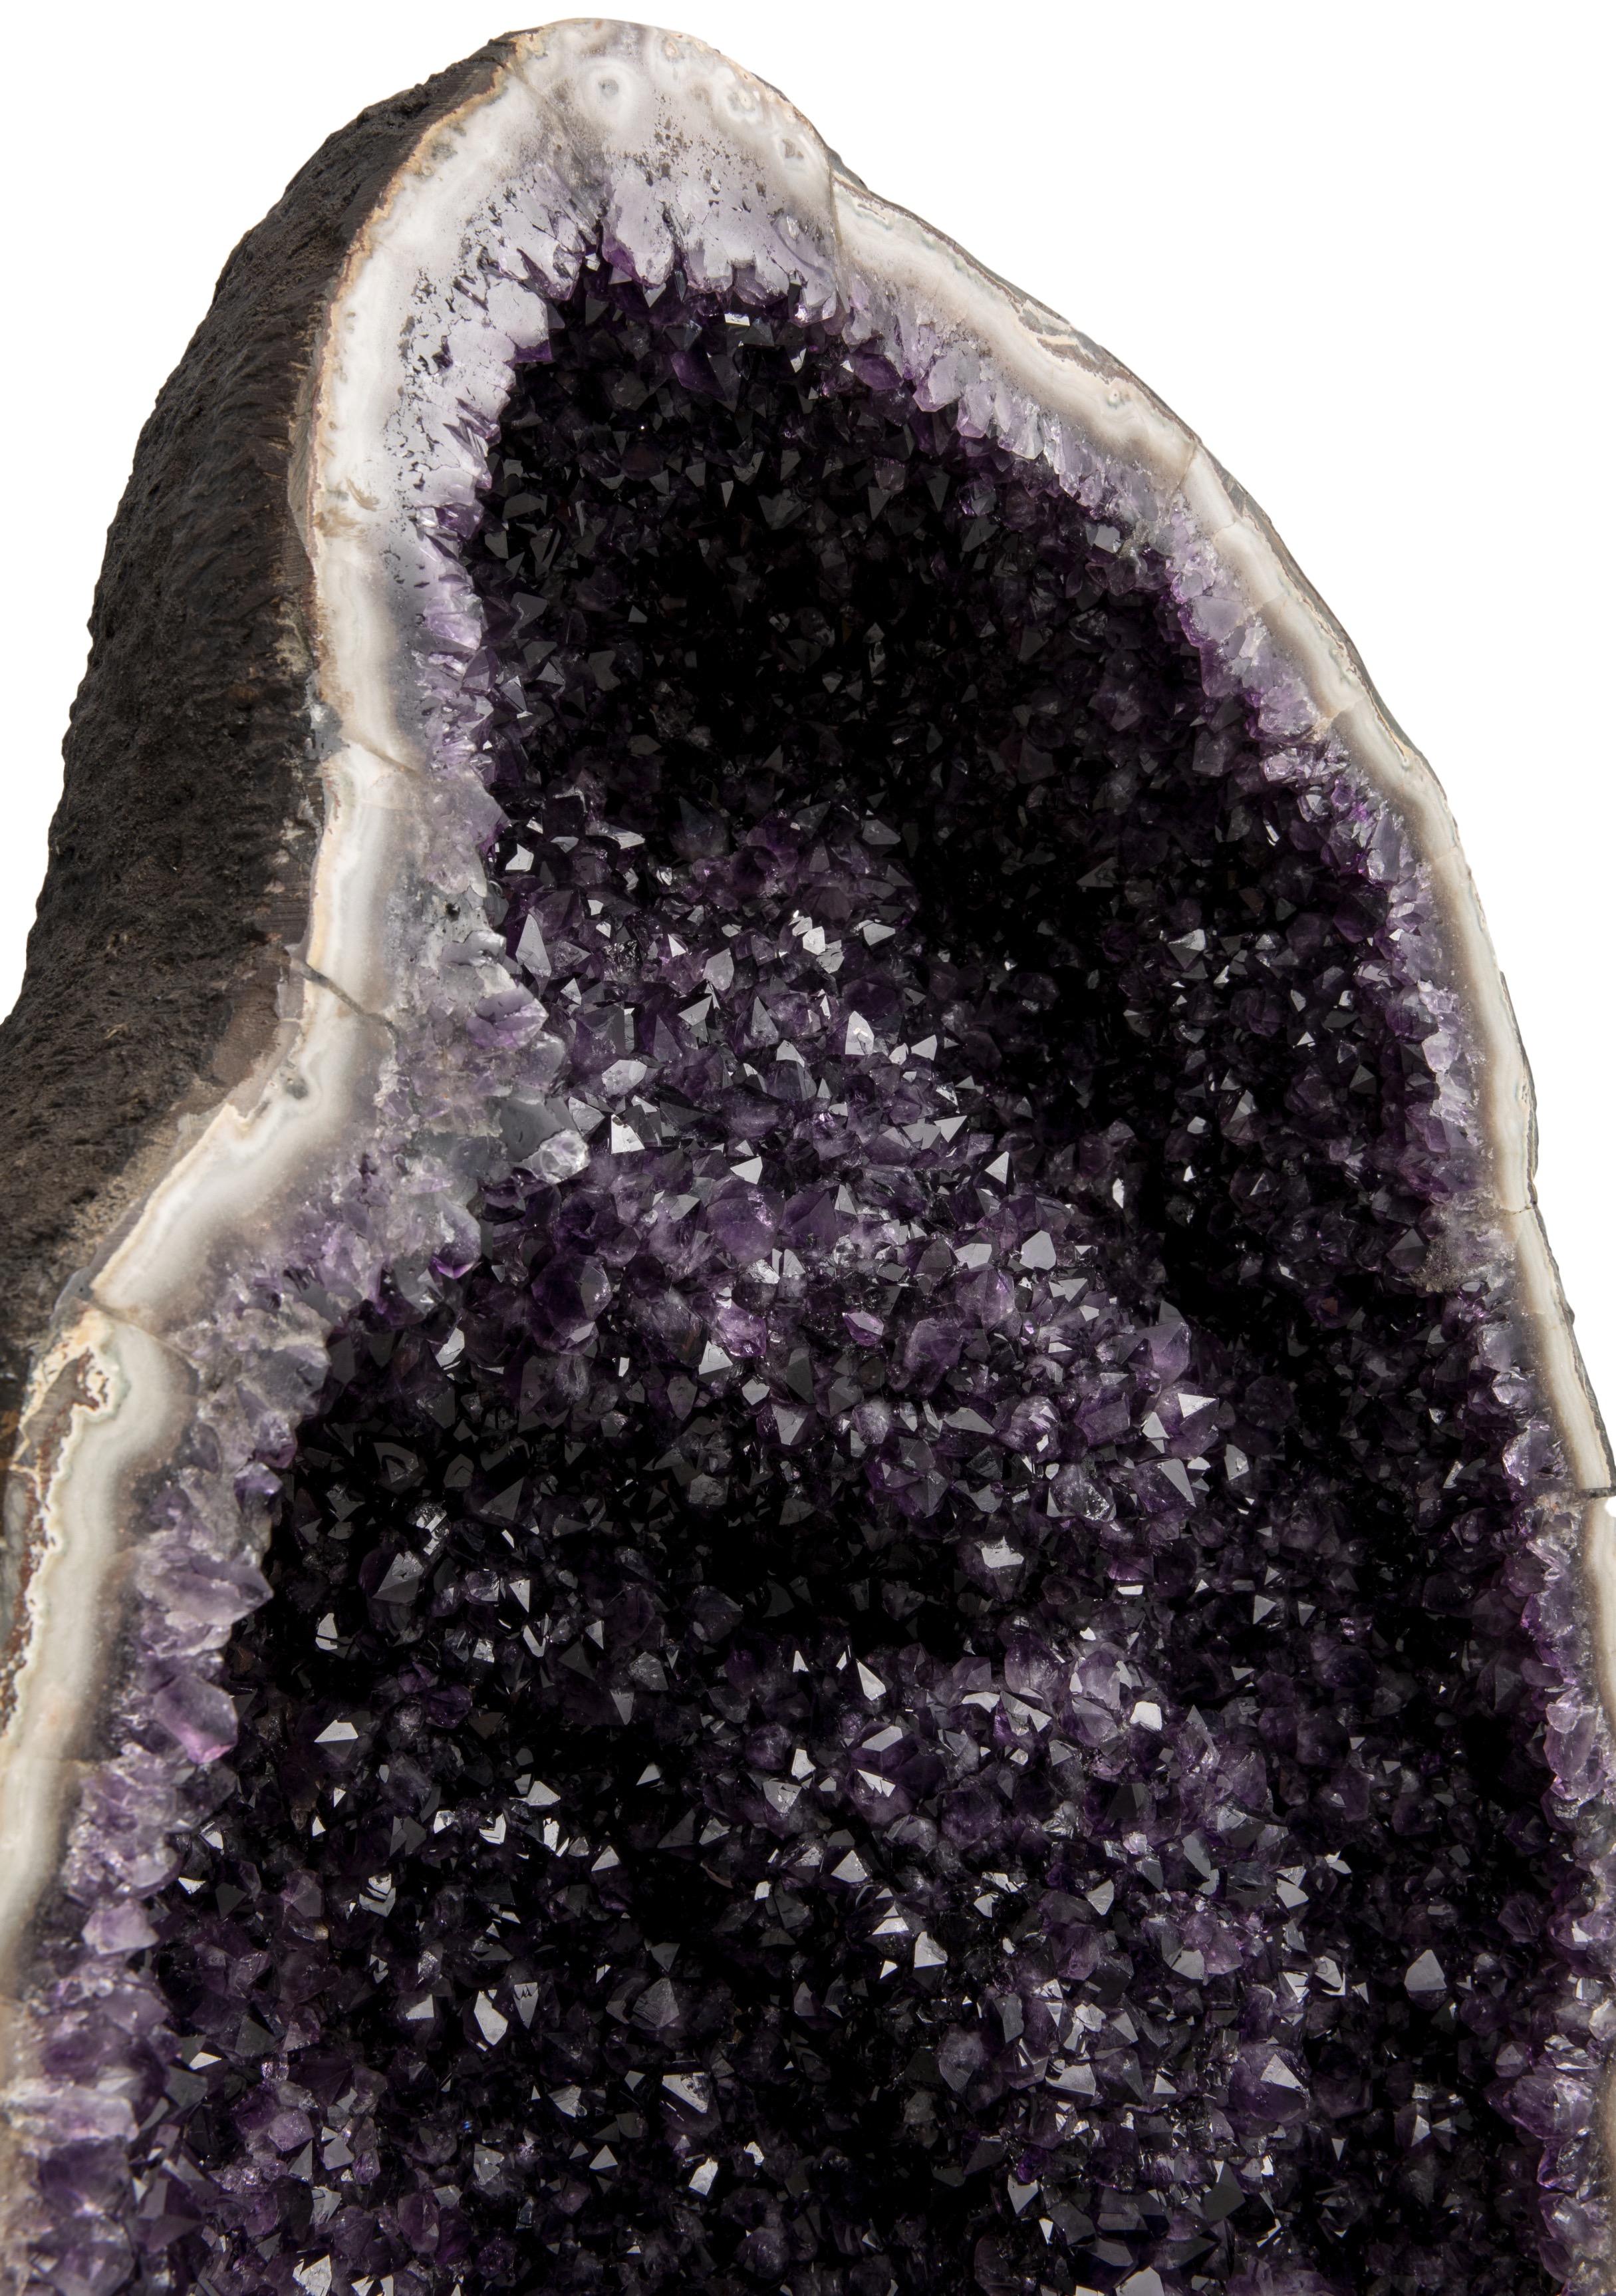 Incredible Deep Purple Amethyst Tower - Complete Half Geode with Agate border 2